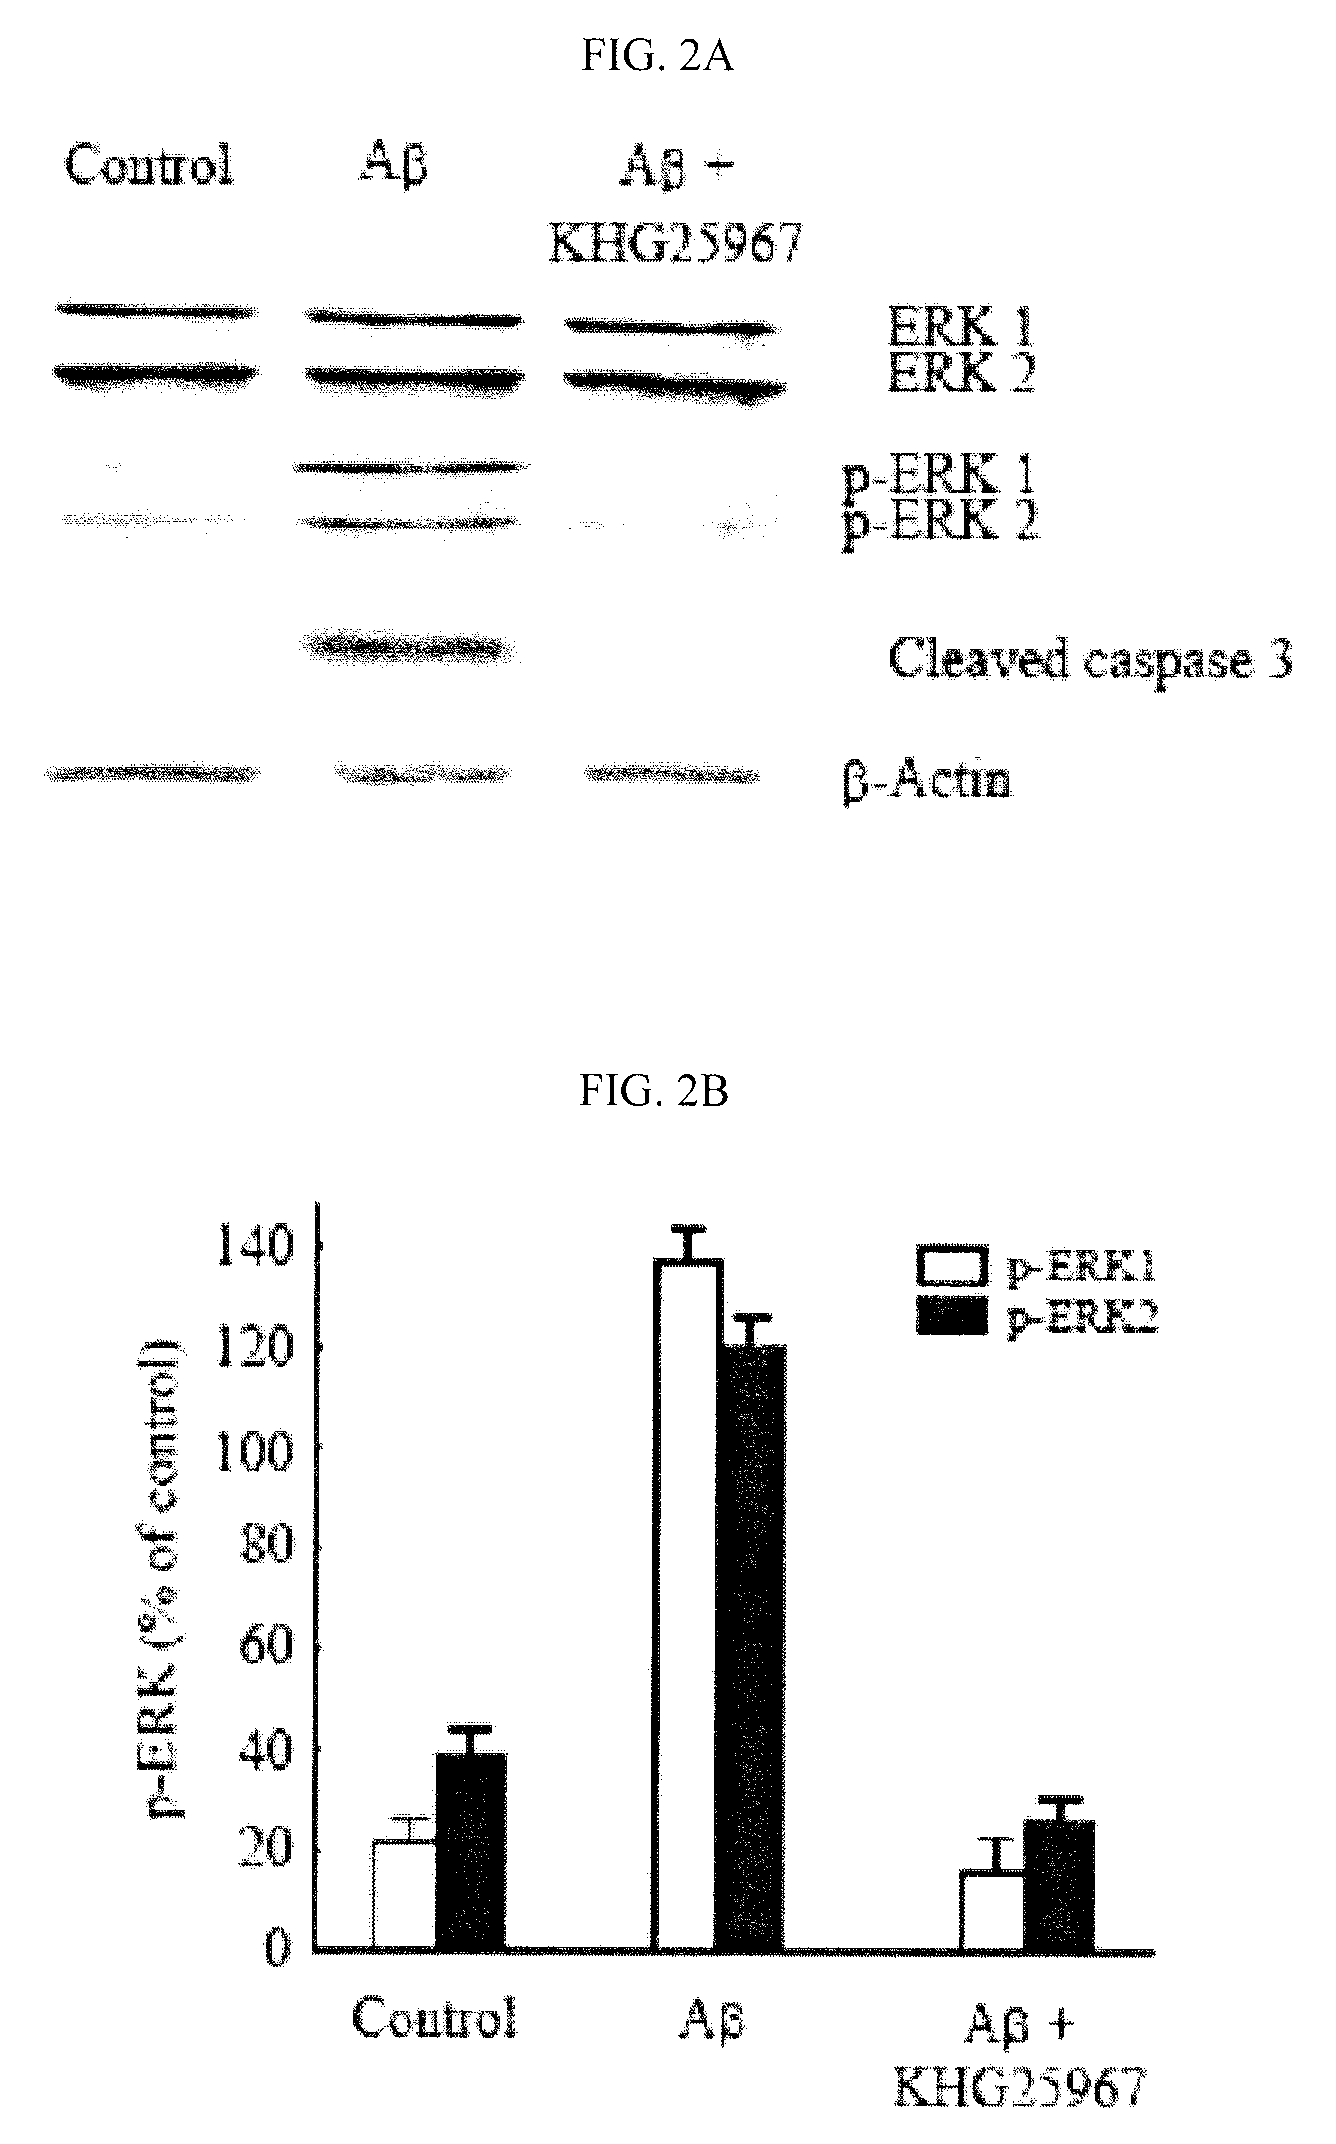 Benzoarylureido compounds, and composition for prevention or treatment of neurodegenerative brain disease containing the same